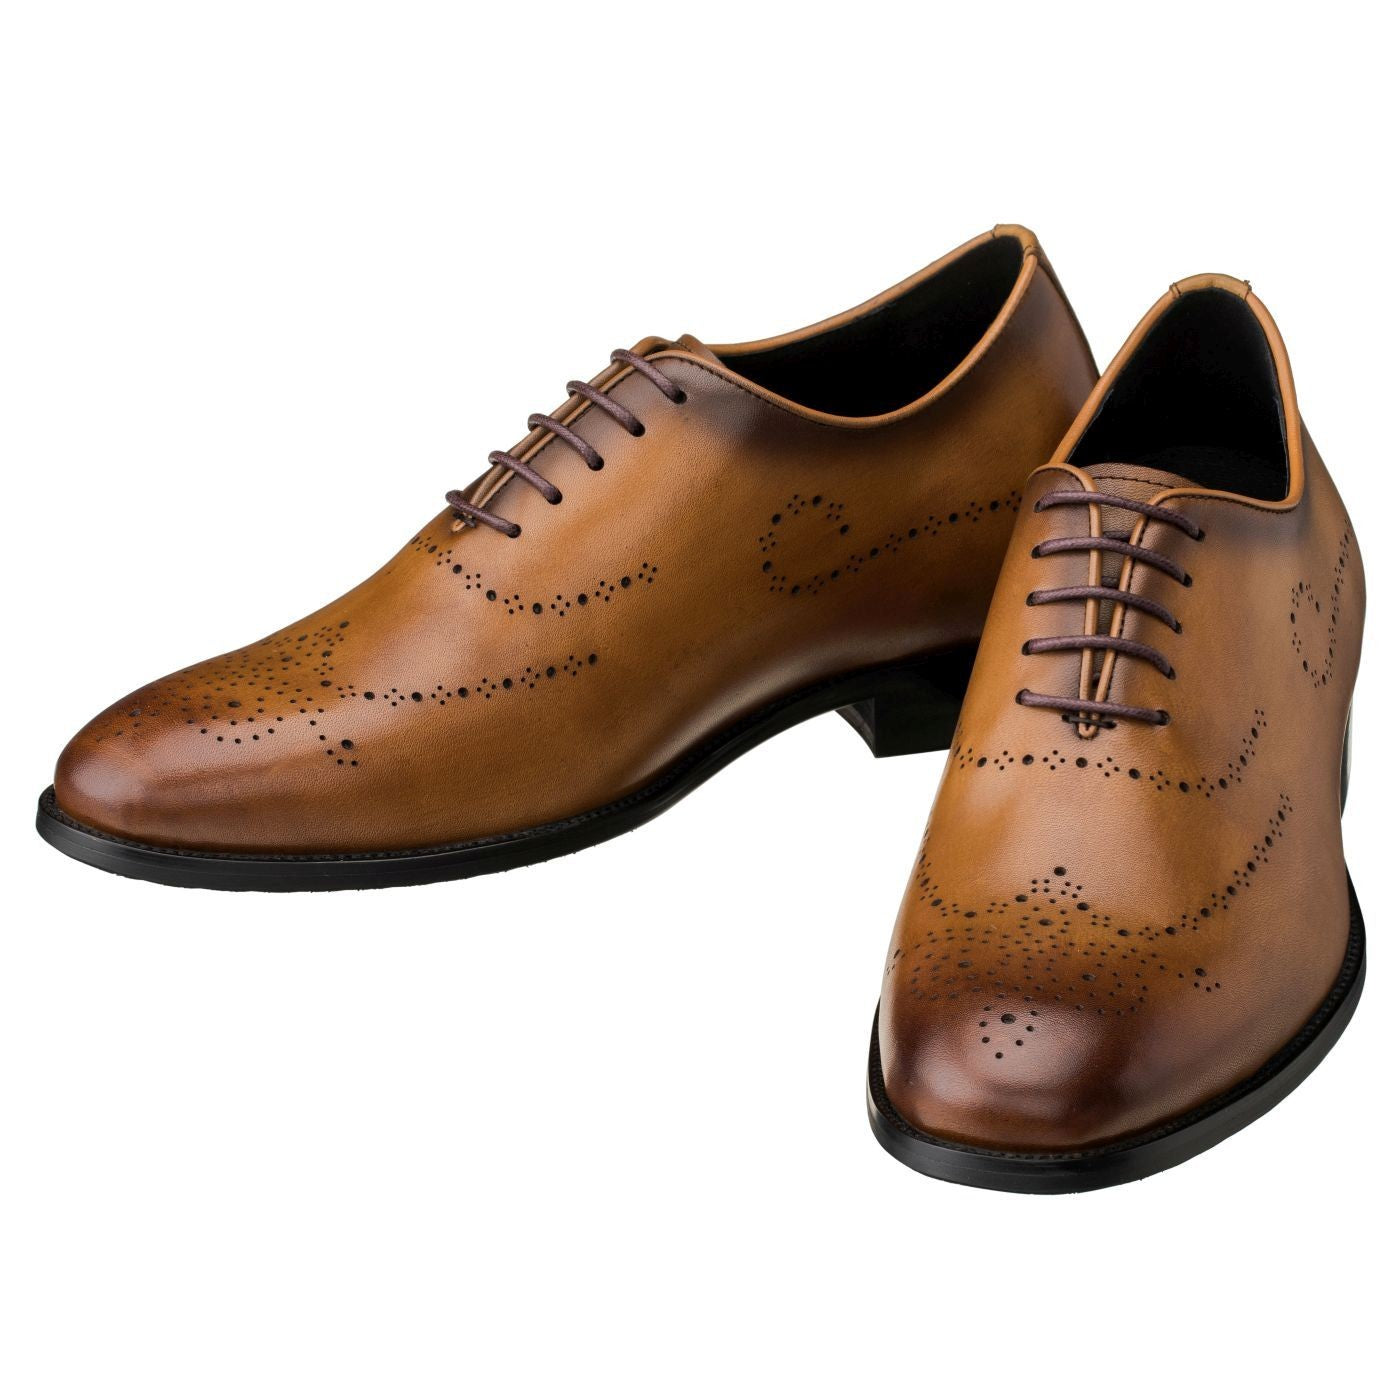 Elevator shoes height increase CALTO - S2212 - 2.8 Inches Taller (Brown Patina) - Seamless Cut